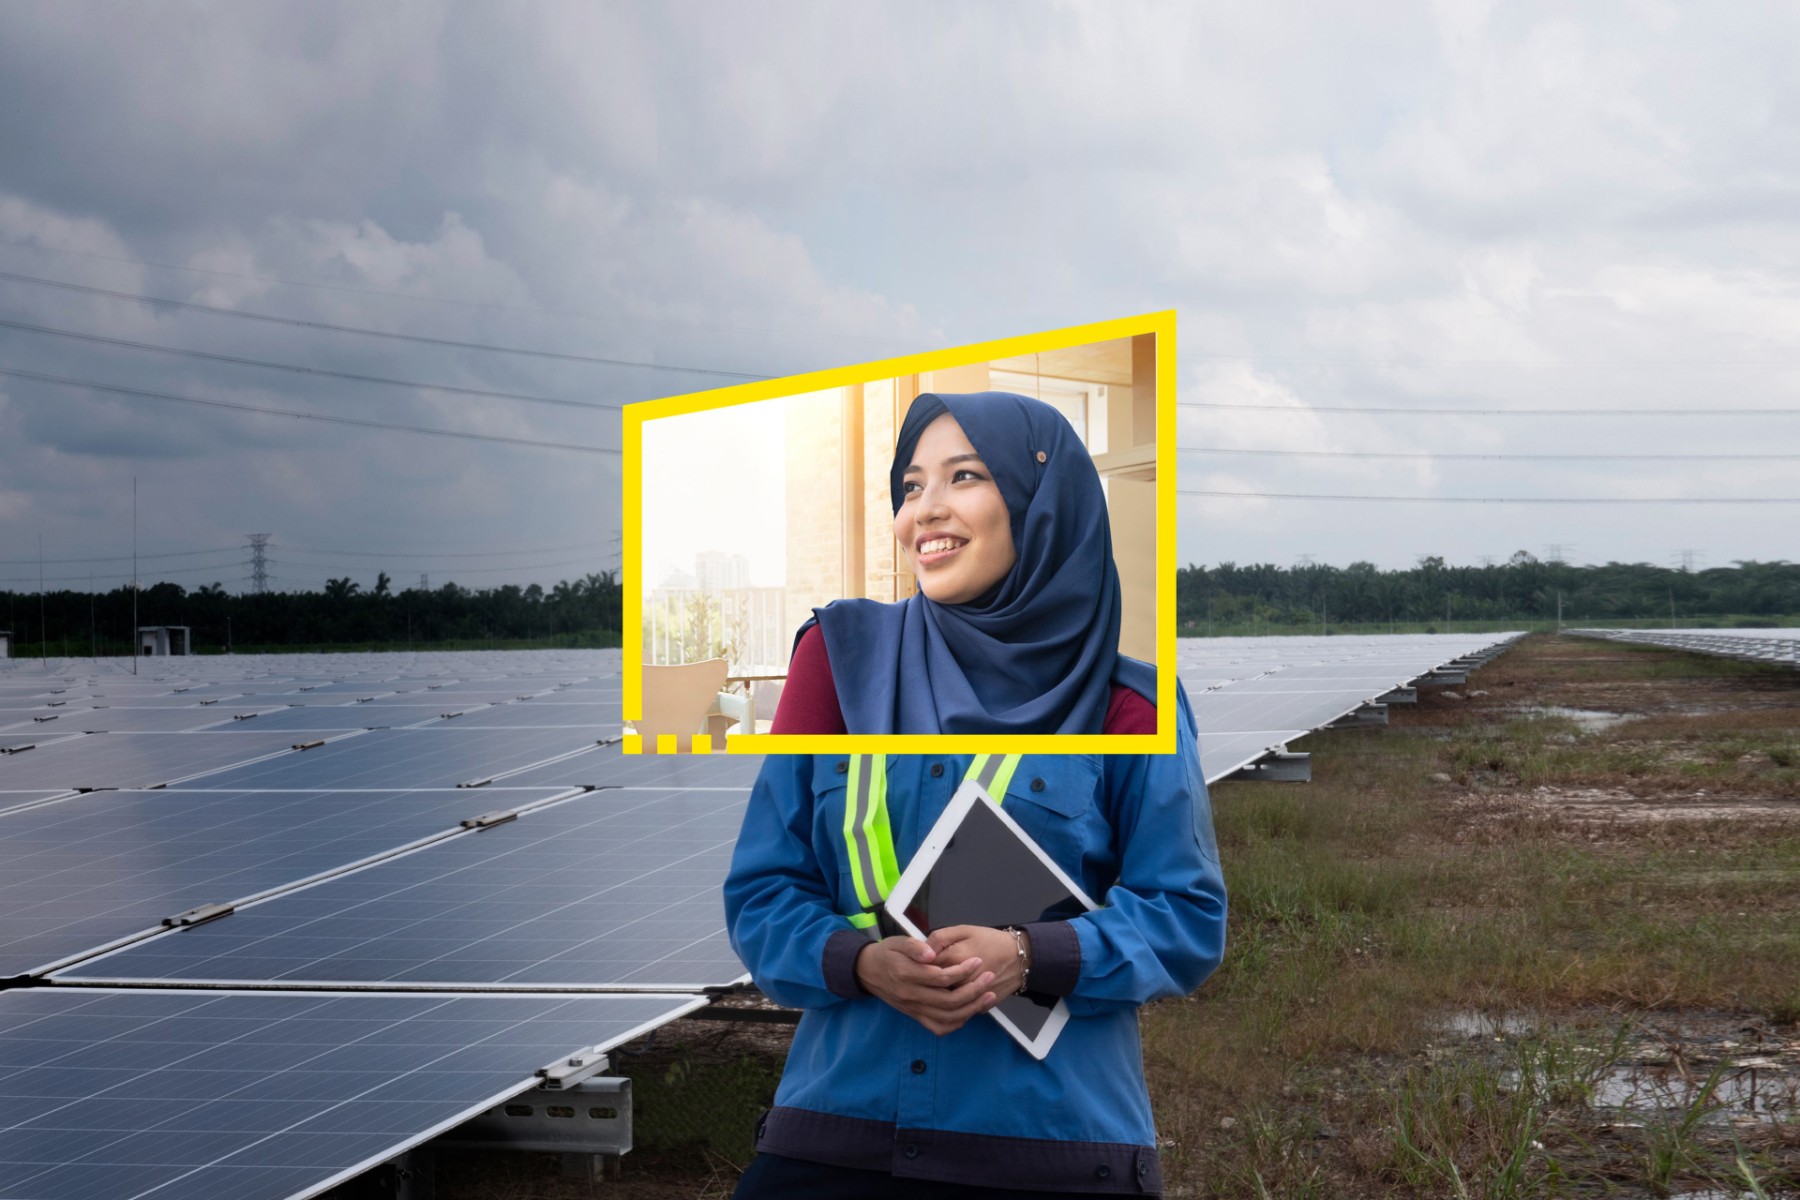 Why people and tech are the fuel for customer-centric transformation. The benefits of the major transformation program undertaken by TNB, while working with EY, could be achieved across many other sectors.